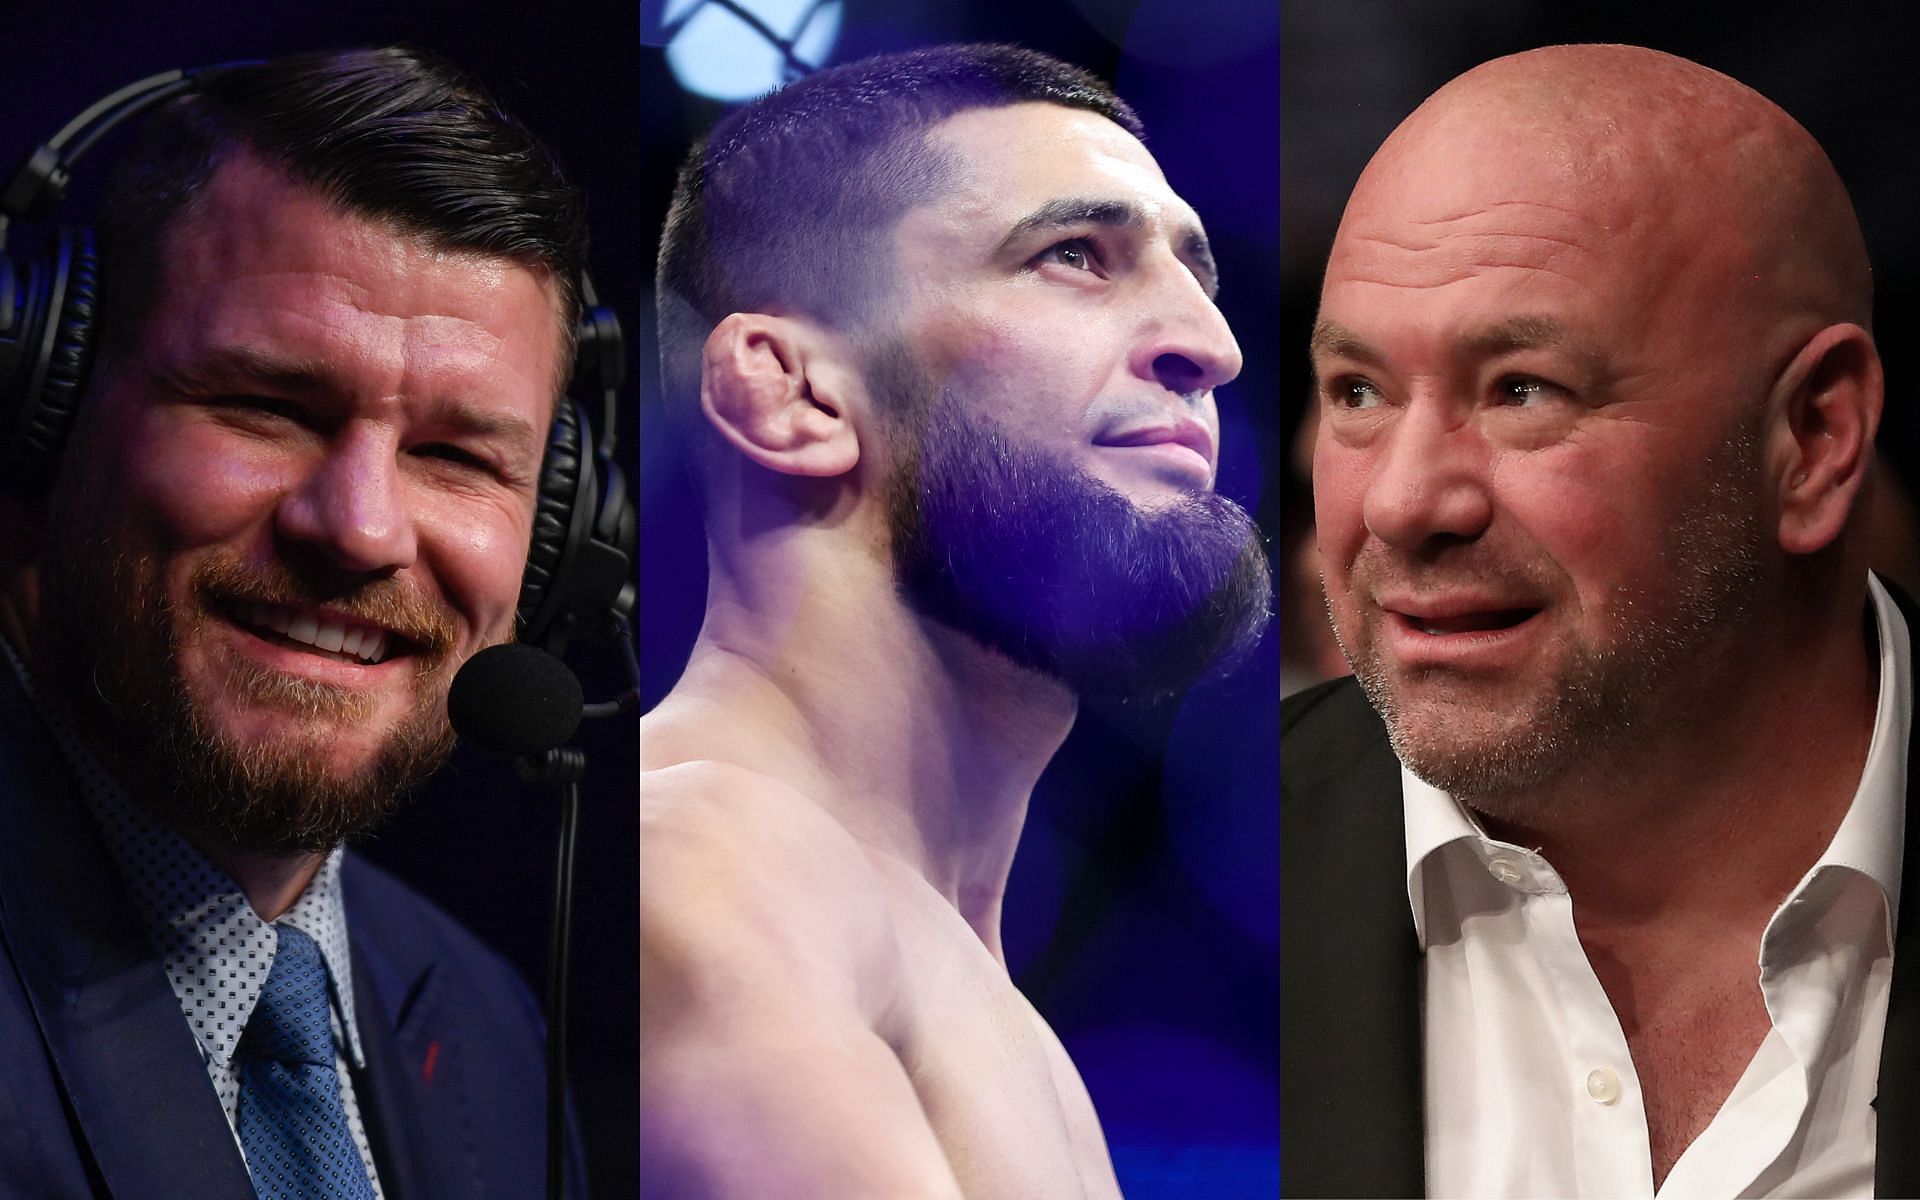 Michael Bisping (Left), Khamzat Chimaev (Middle), and Dana White (Right)